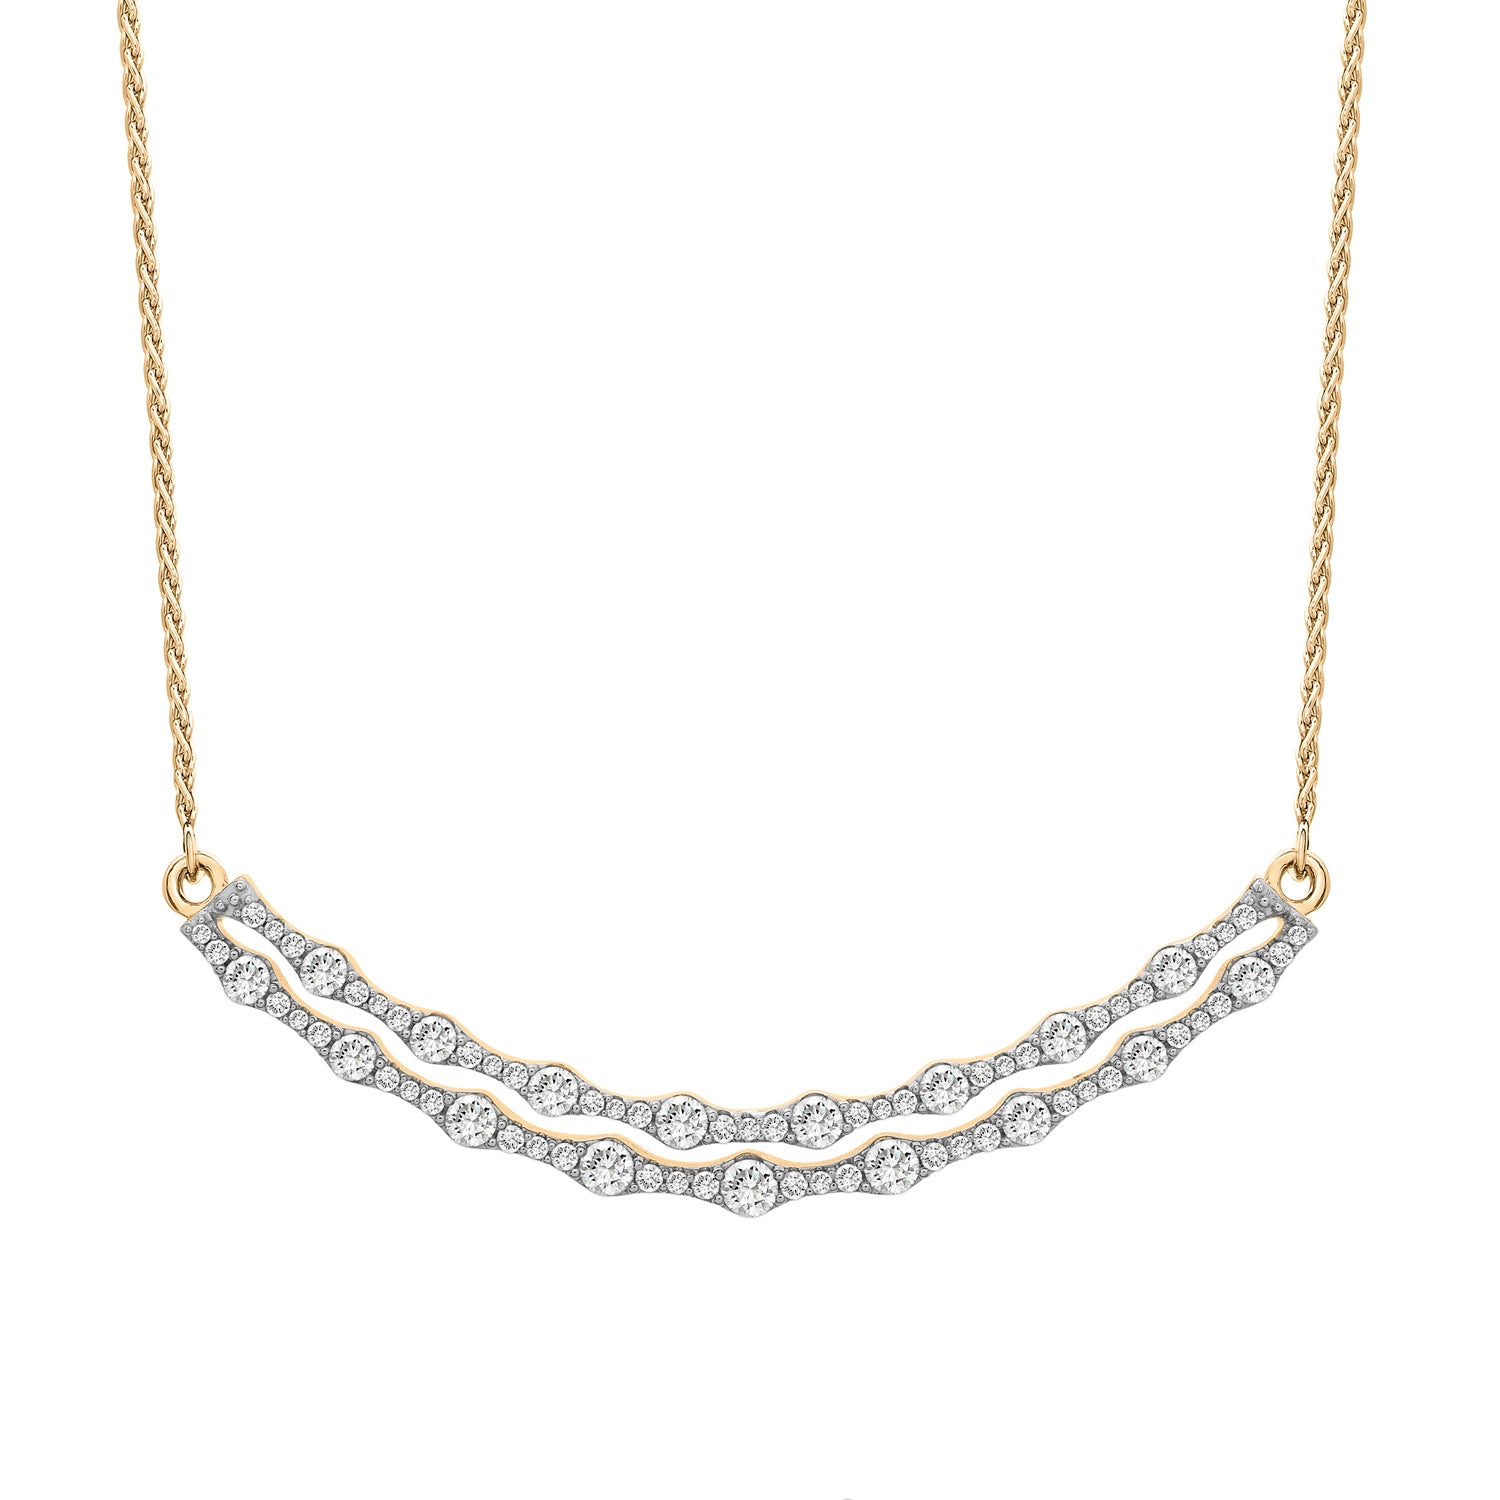 Piare Diamond Necklace in Yellow Gold